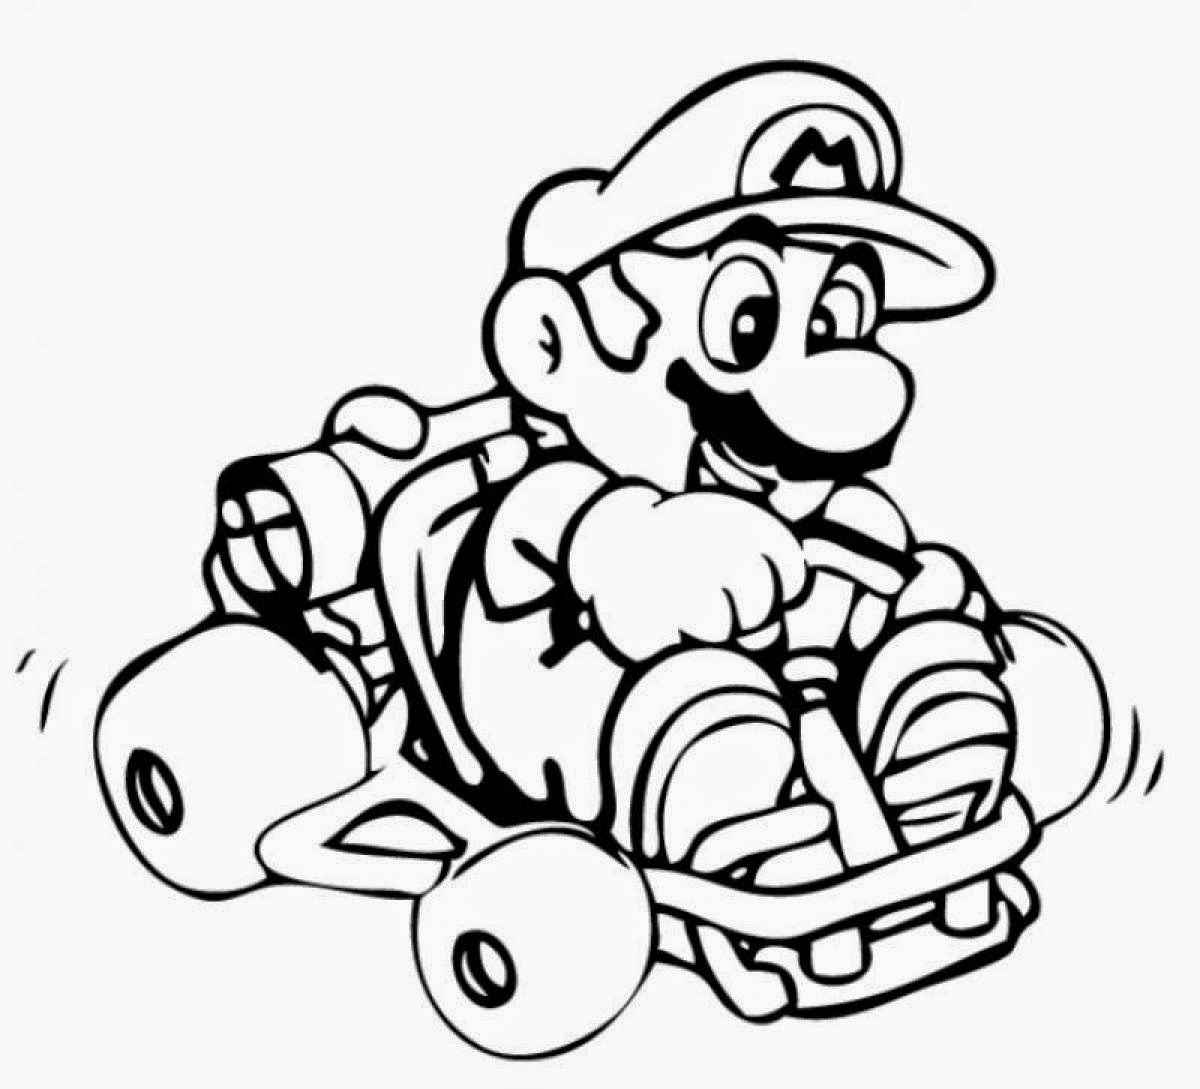 Mario Pictures To Color 10